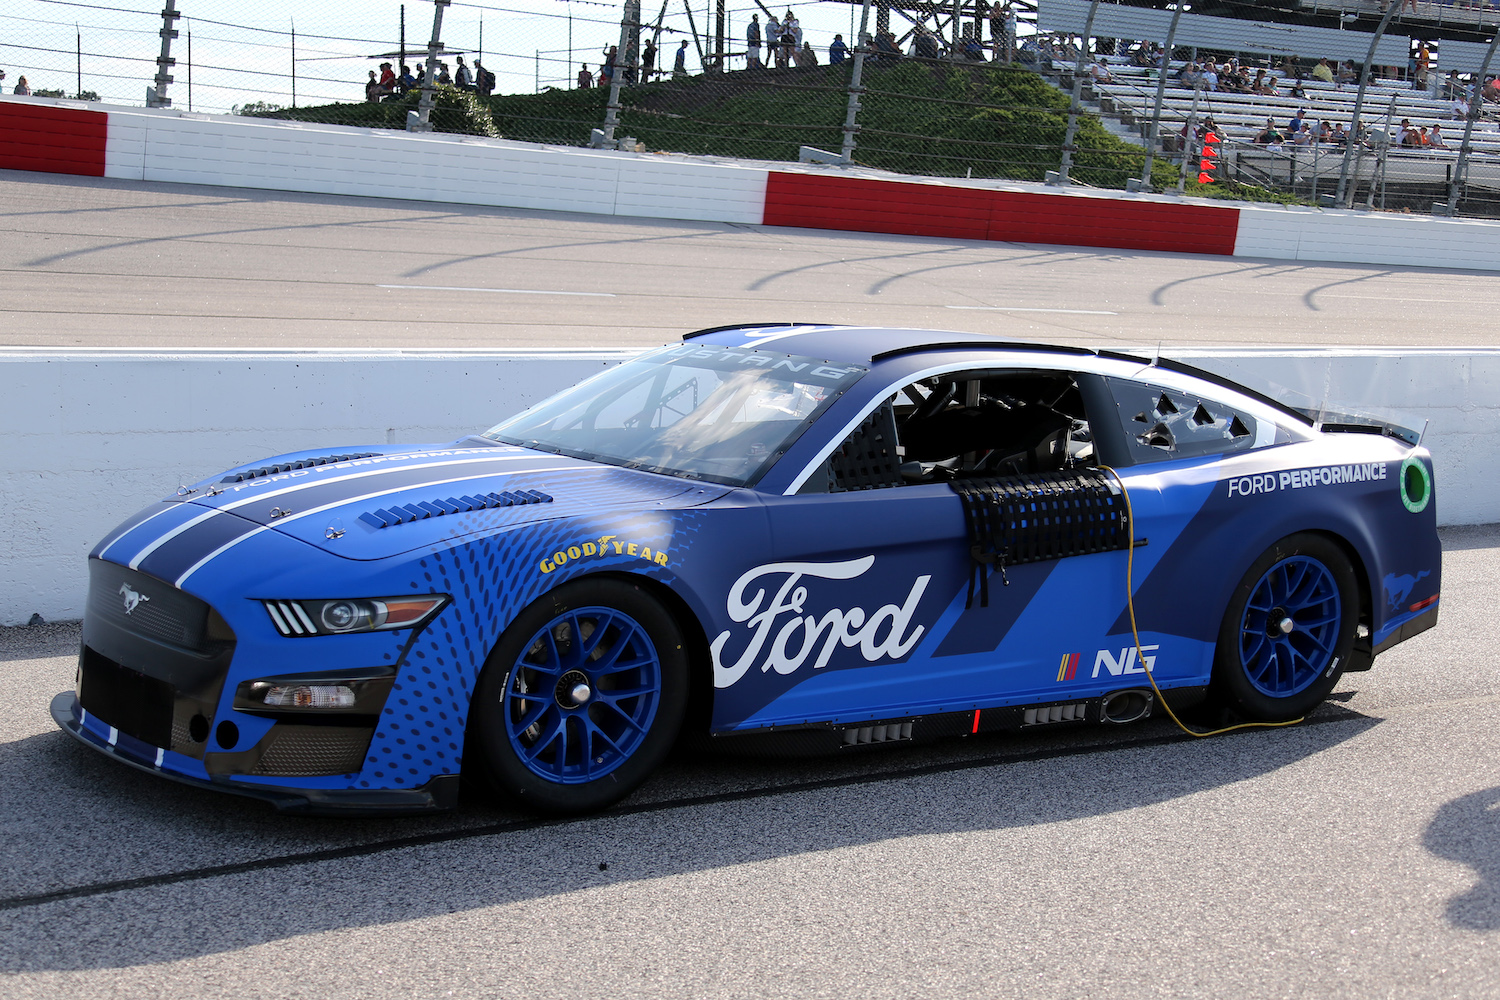 This is the 2022 NASCAR Next Gen Ford Mustang race car. The Next Gen cars are more stock than current NASCAR race cars.